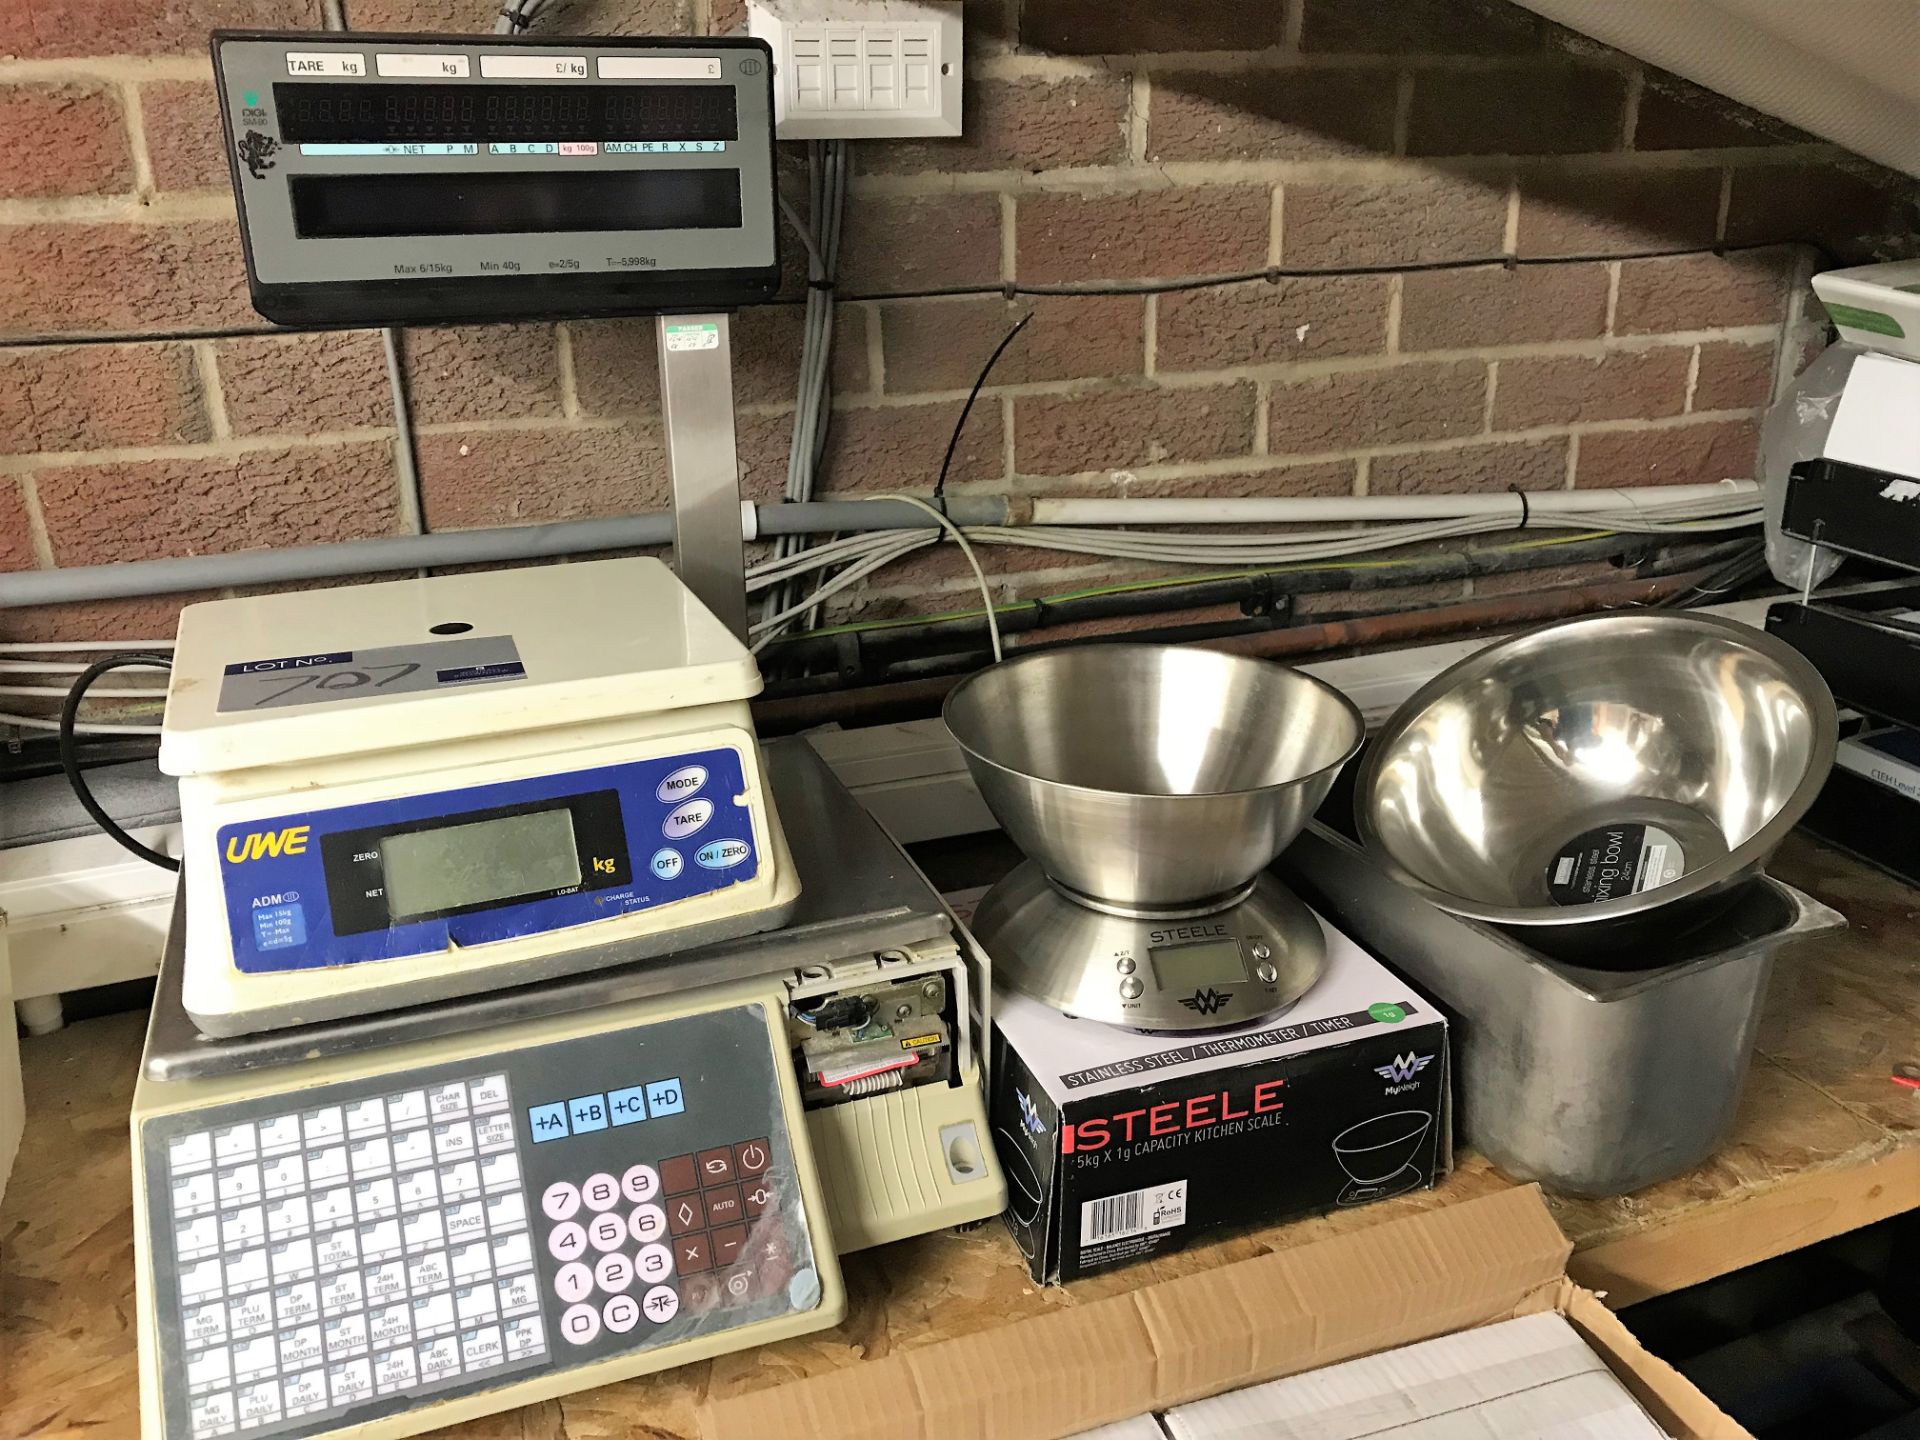 3 sets of Scales (all faults) with 2 Stainless Steel Bowls (Cornford Road, Blackpool).